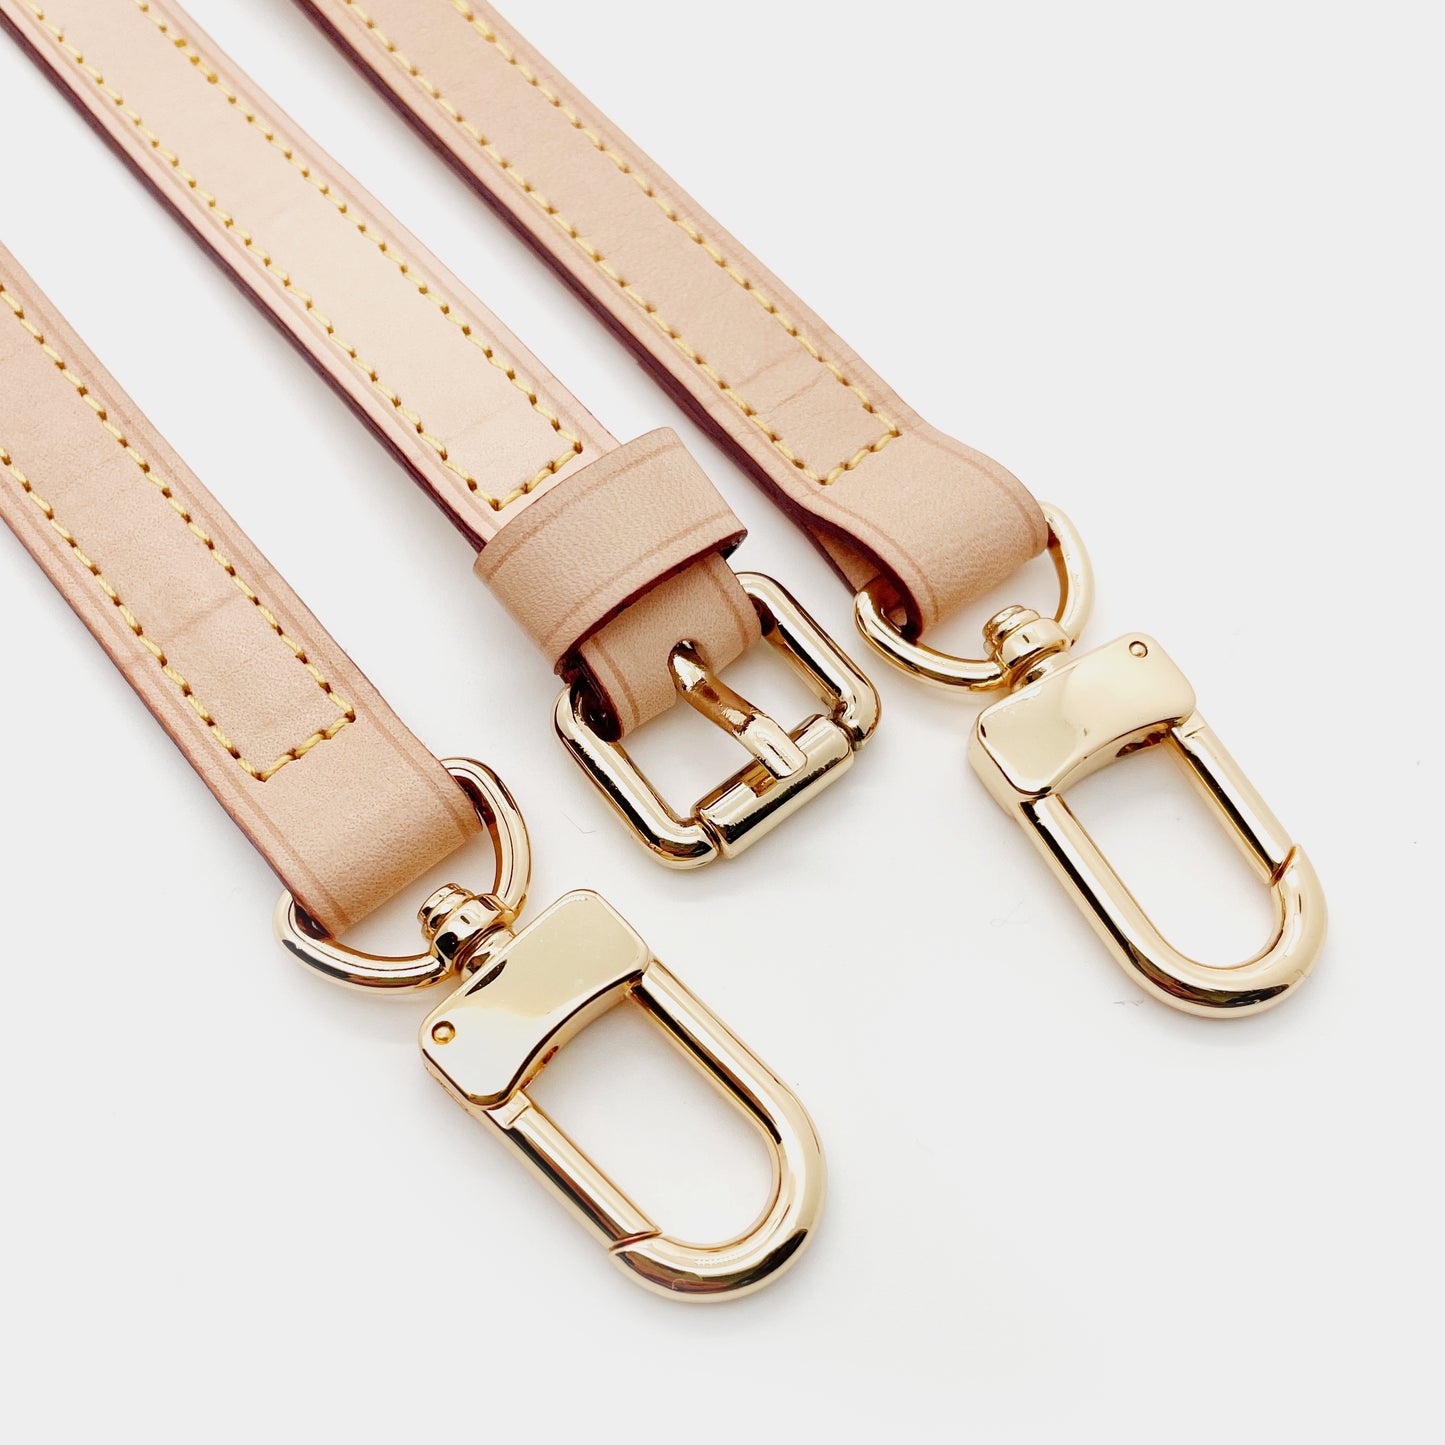 Adjustable Leather Strap in vachetta leather - 1.5cm wide